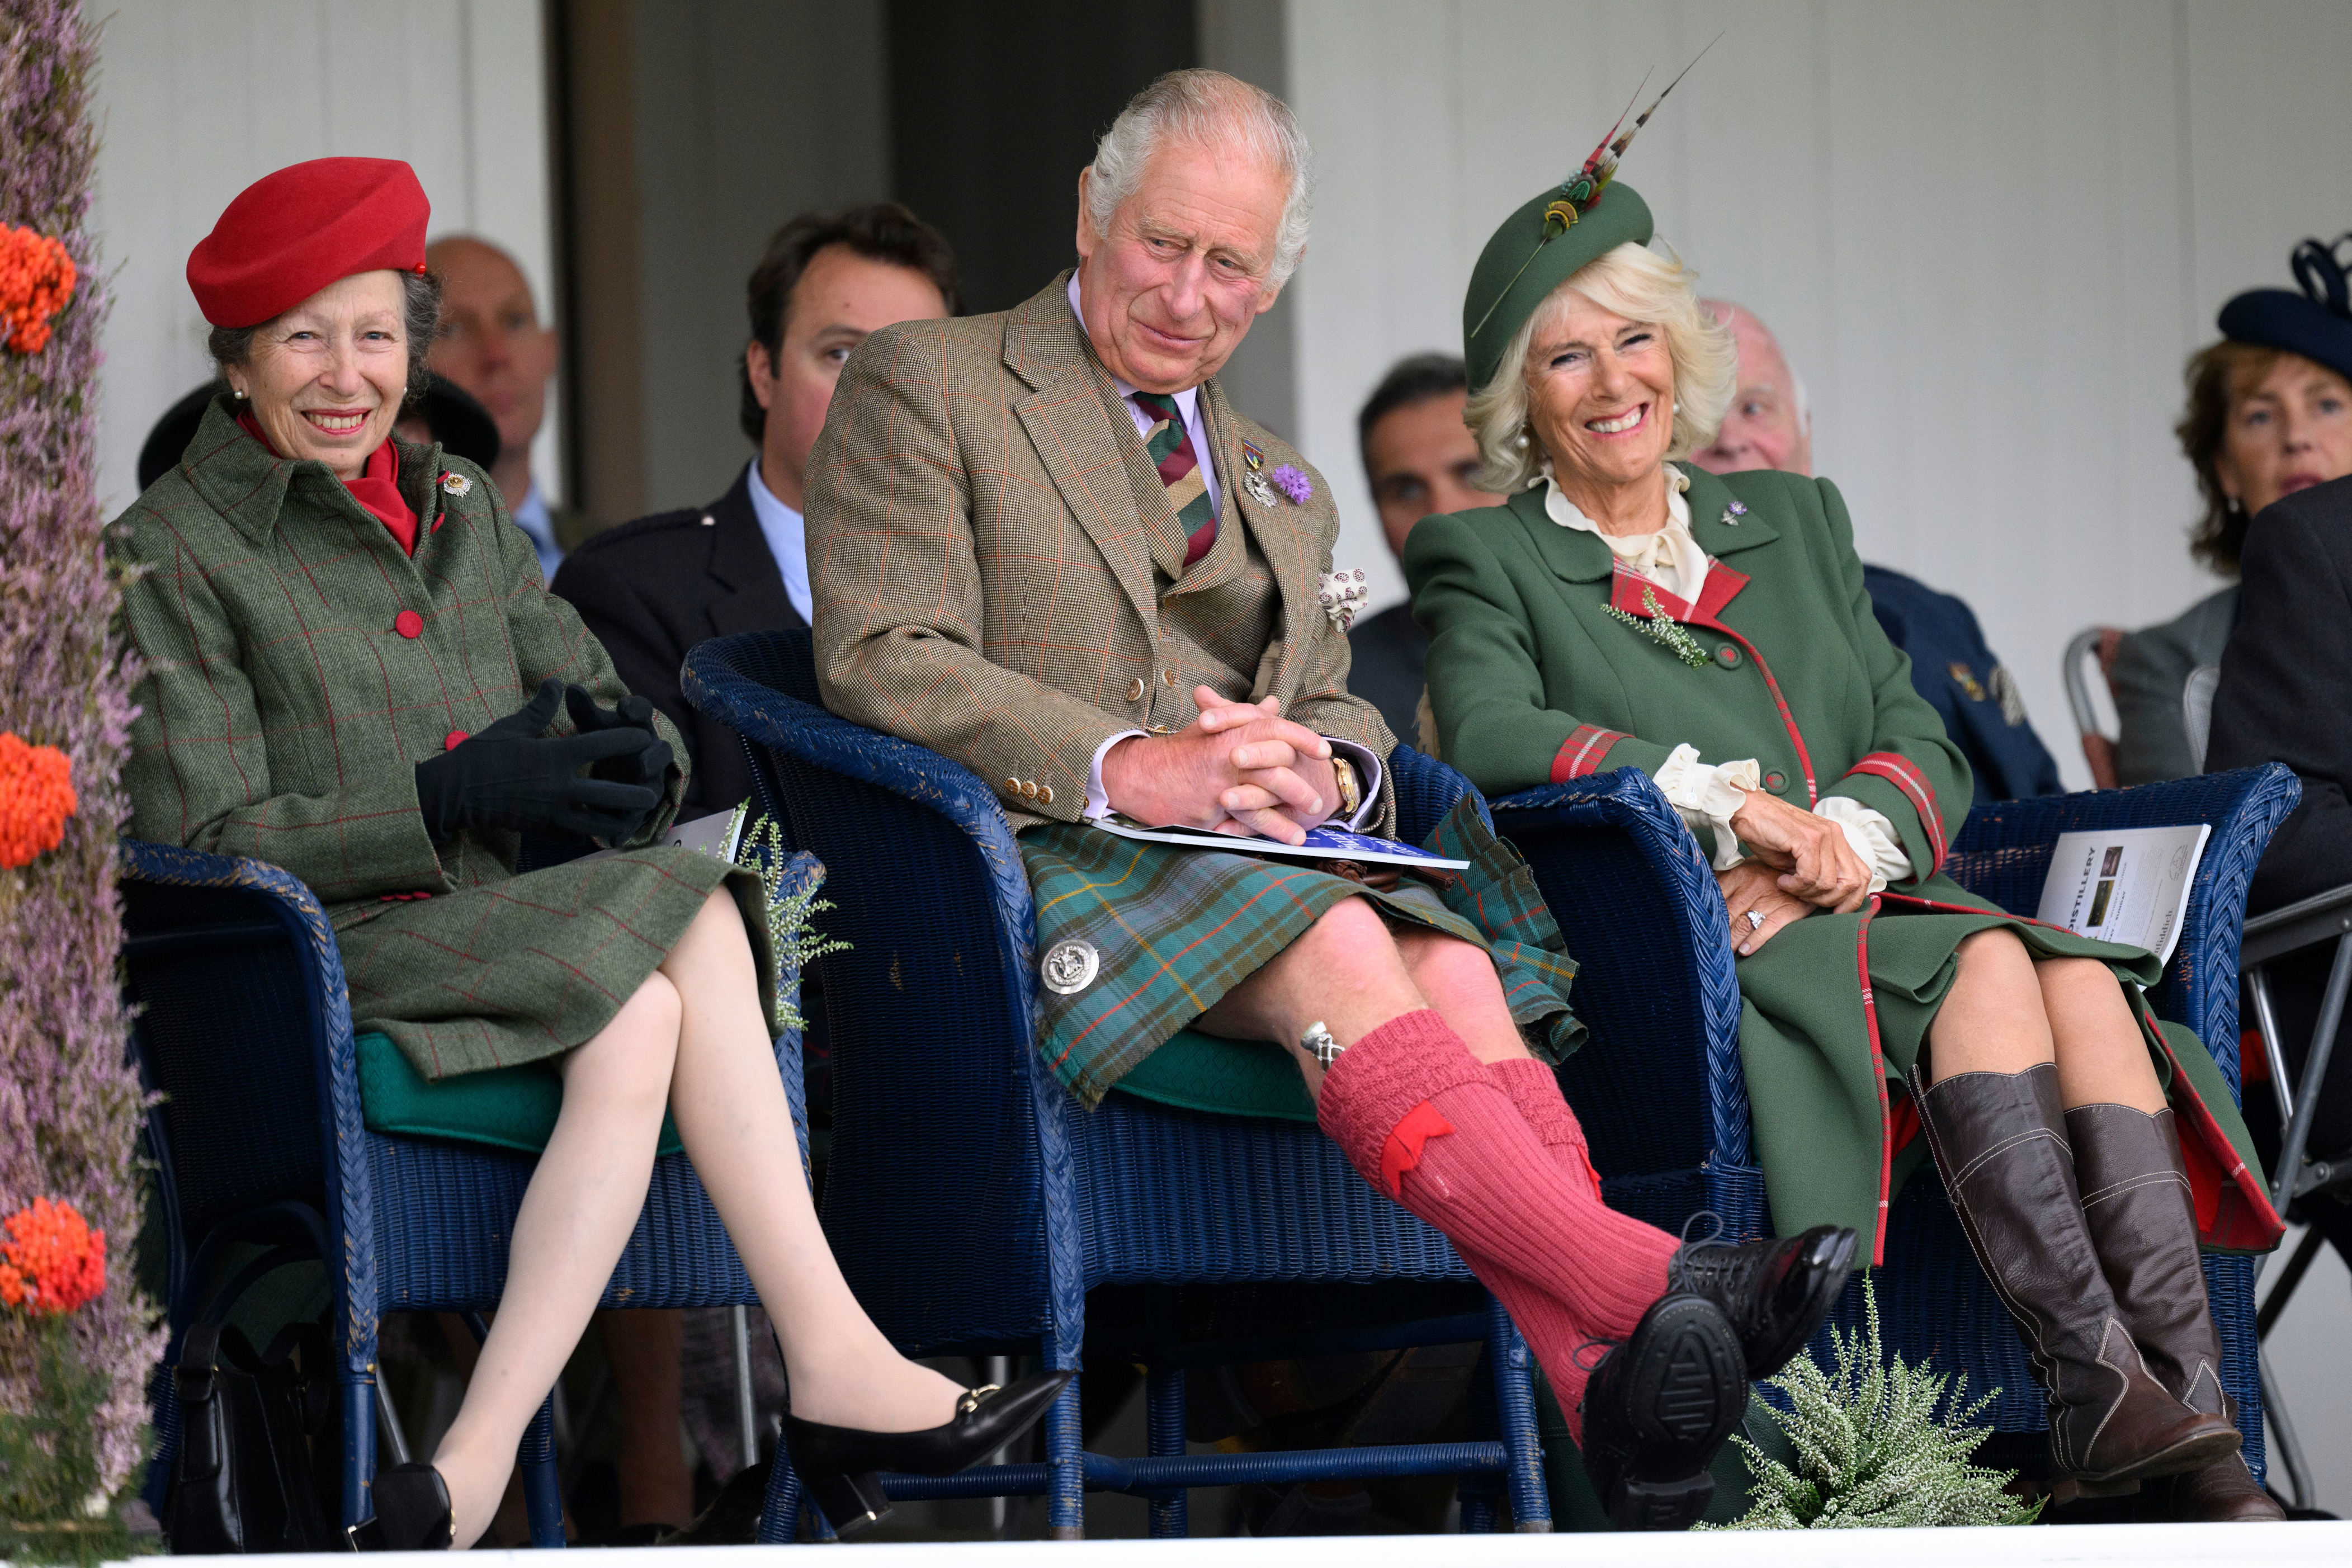 <p><span>With Queen Elizabeth II unable to attend due to ongoing health issues, her two oldest children -- Princess Anne and Prince Charles -- went in her stead and shared a laugh with the then-Prince of Wales's wife, Camilla, Duchess of Cornwall, during the annual Braemar Gathering Highland Games at the Princess Royal and Duke of Fife Memorial Park in Braemar, Aberdeenshire, Scotland, on Sept. 3, 2022 -- five days before </span><a href="https://www.wonderwall.com/celebrity/celebrities-dignitaries-react-to-death-of-queen-elizabeth-ii-647756.gallery">the queen's death</a><span> at Balmoral Castle, her estate in the Scottish Highlands, and her son's accession as the newly named King Charles III.</span></p>